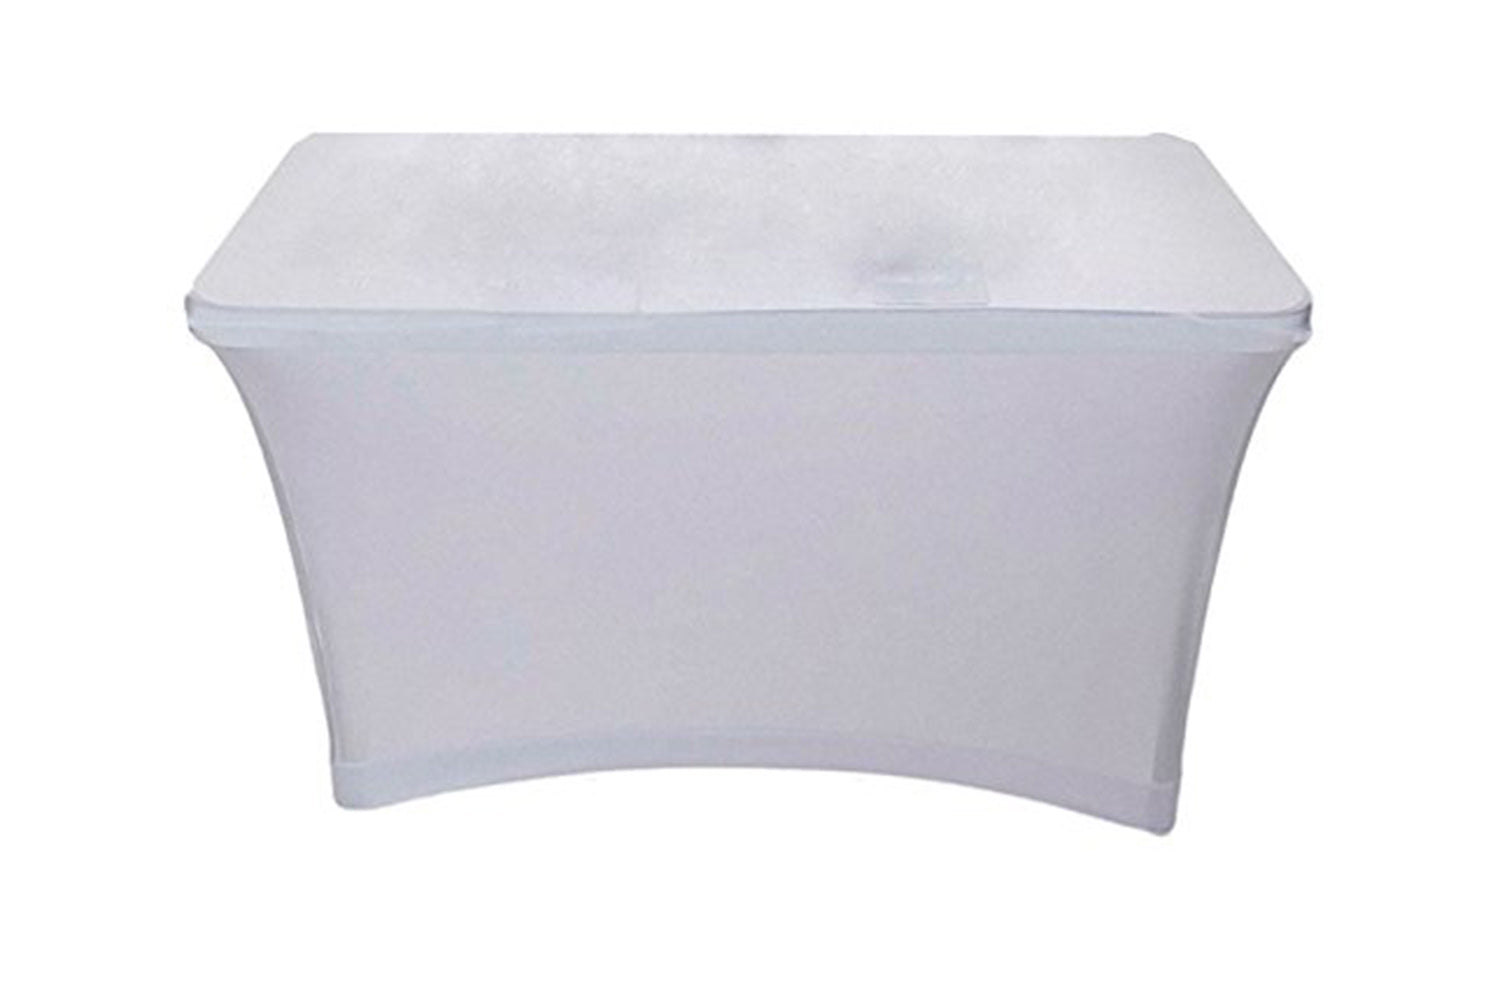 B-Stock: REPLACEMENT SCRIM Scrim King SS-TBL 402-W White 4' Table Scrim with Closed Back - Hollywood DJ